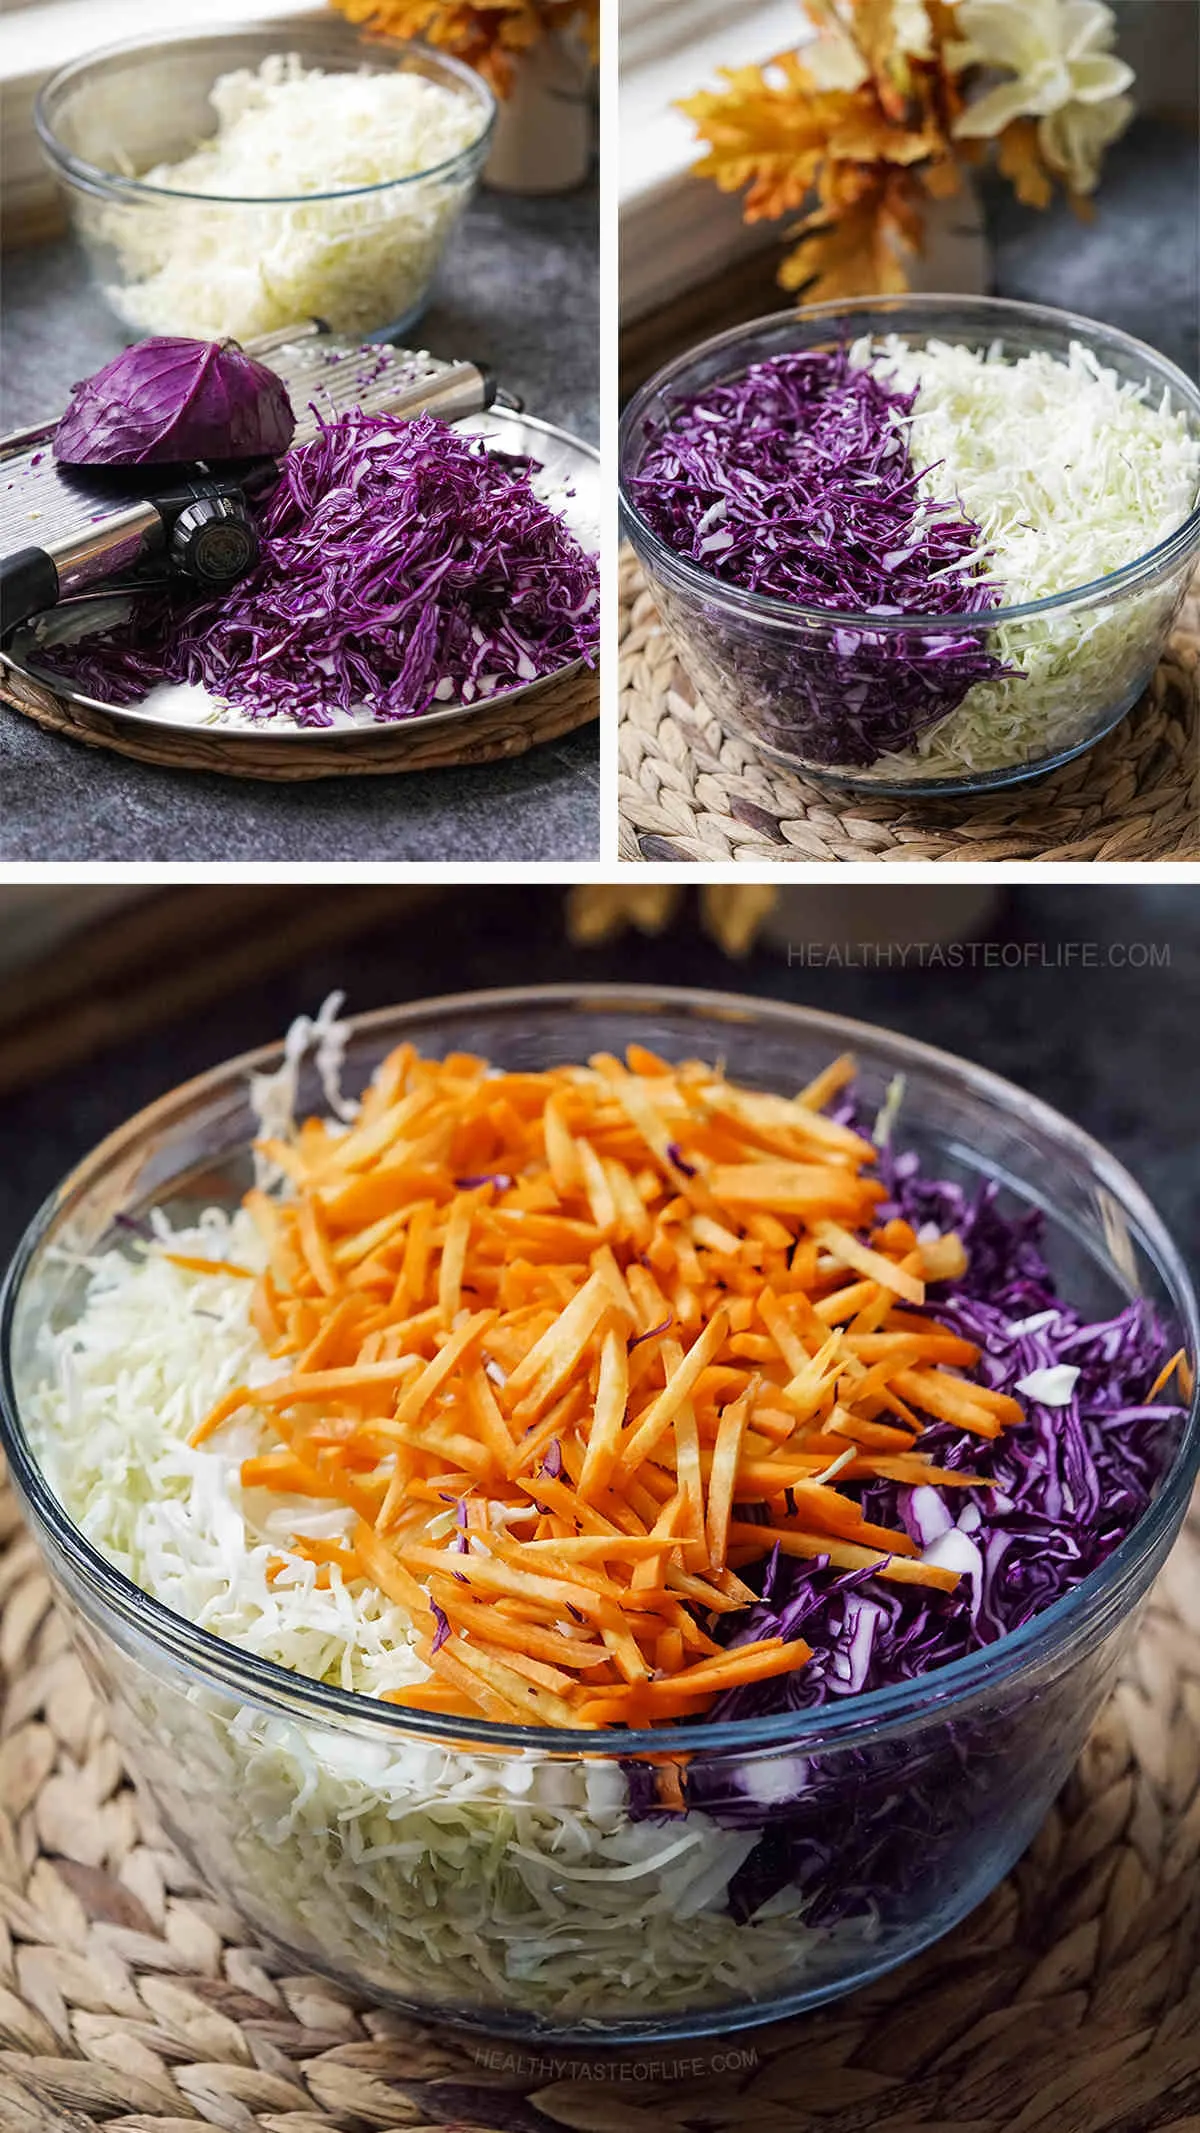 Ingredients for red cabbage kraut: shredded red cabbage, shredded green/white cabbage and carrots julienned all gathered in a bowl.